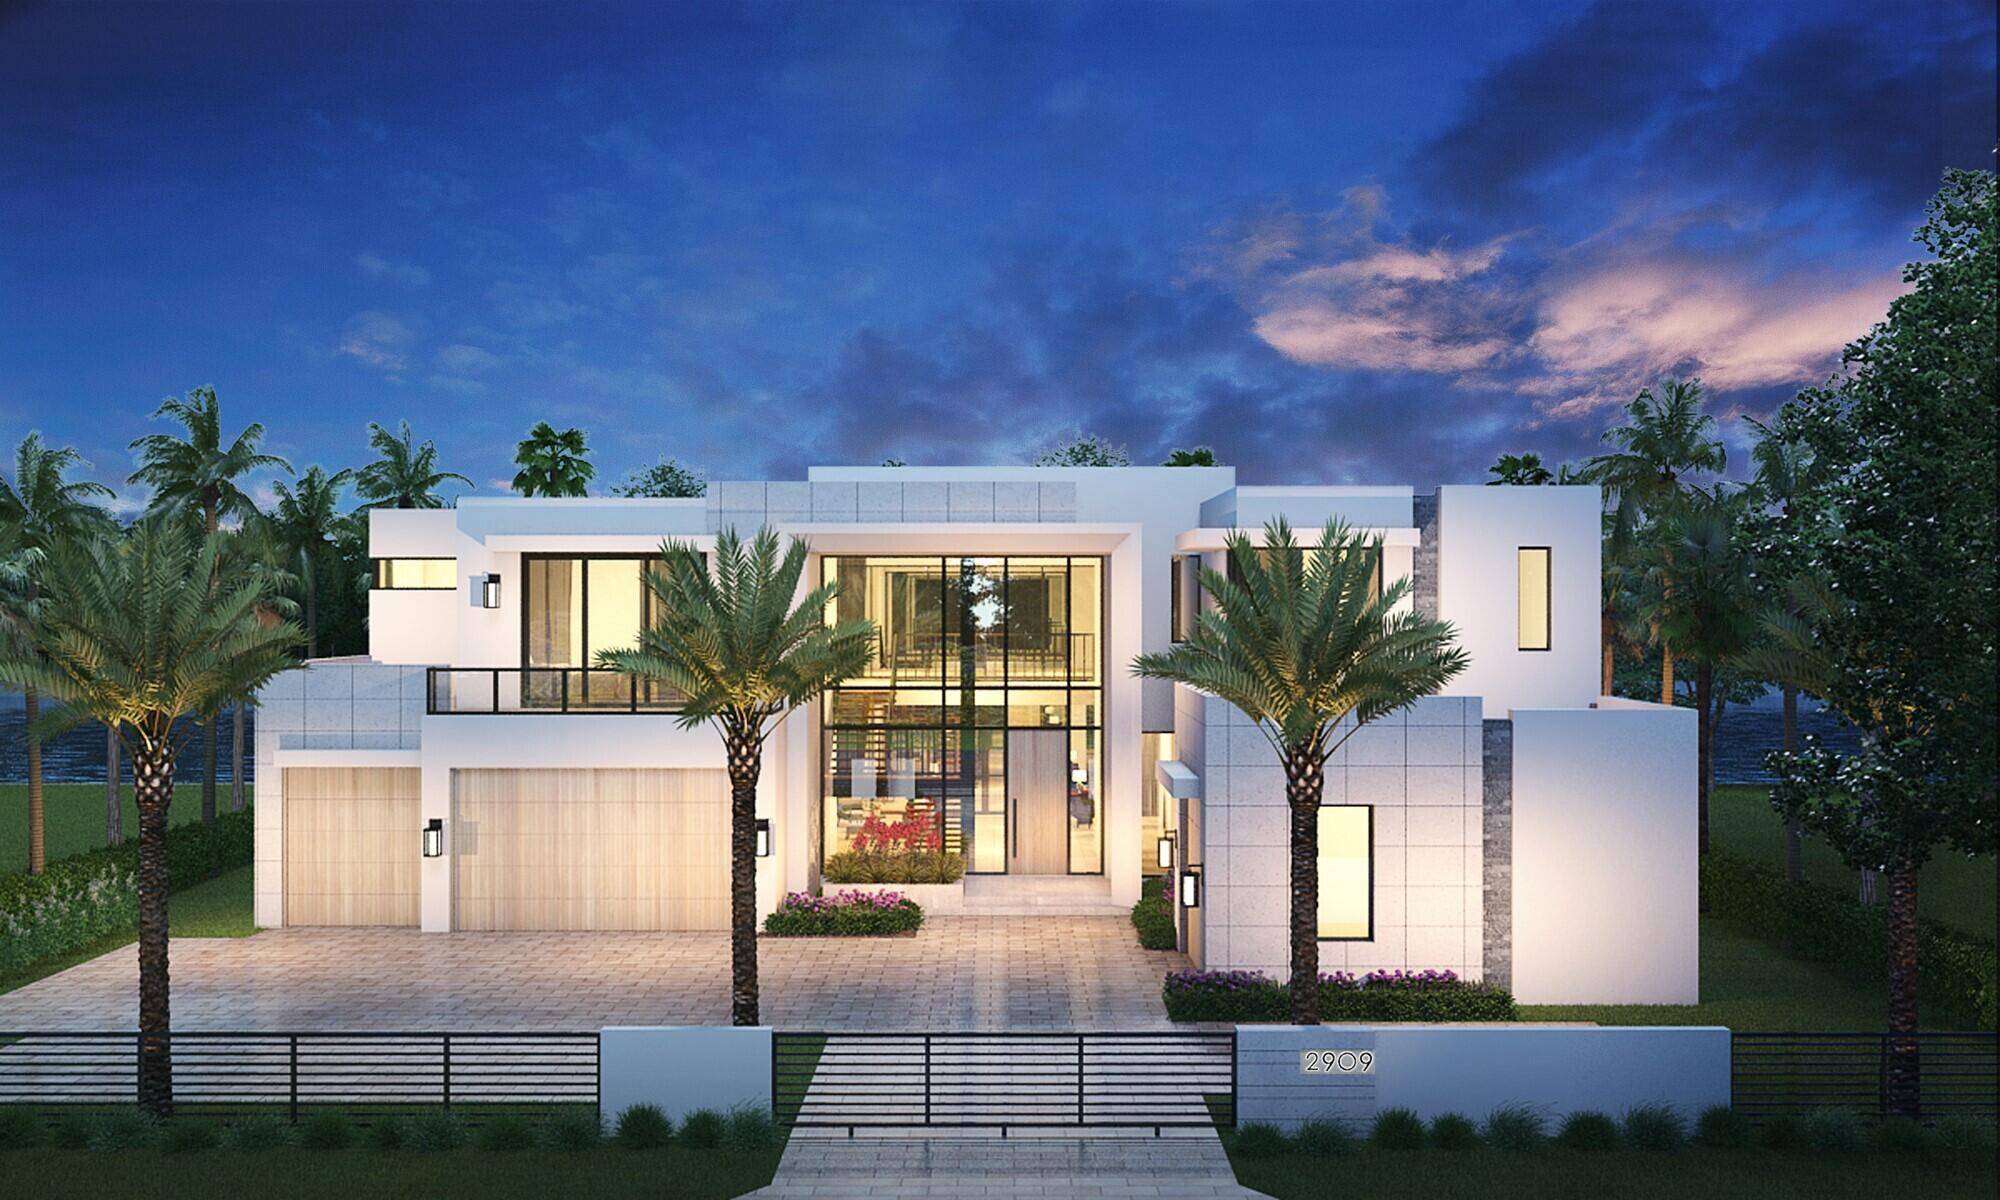 Introducing a new Museum Modern Intracoastal masterpiece by JH Norman Construction Company Inc and Brenner Architecture Group LLC with two stories, five bedrooms, six full baths and two half baths.